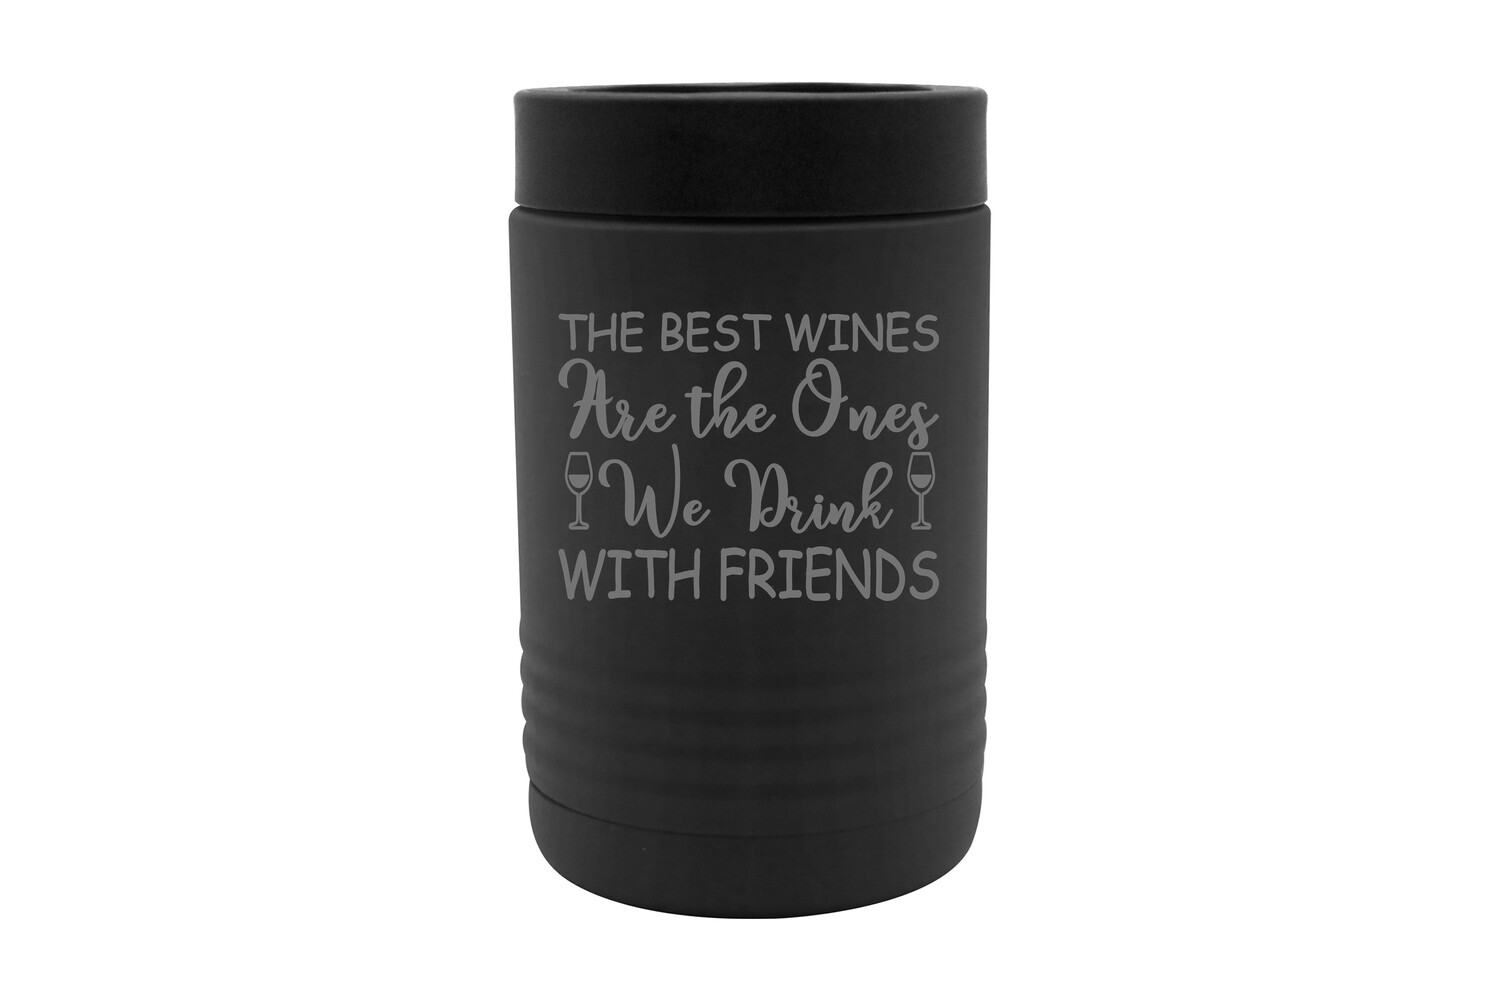 The Best Wines are the Ones We Drink with Friends Insulated Beverage Holder